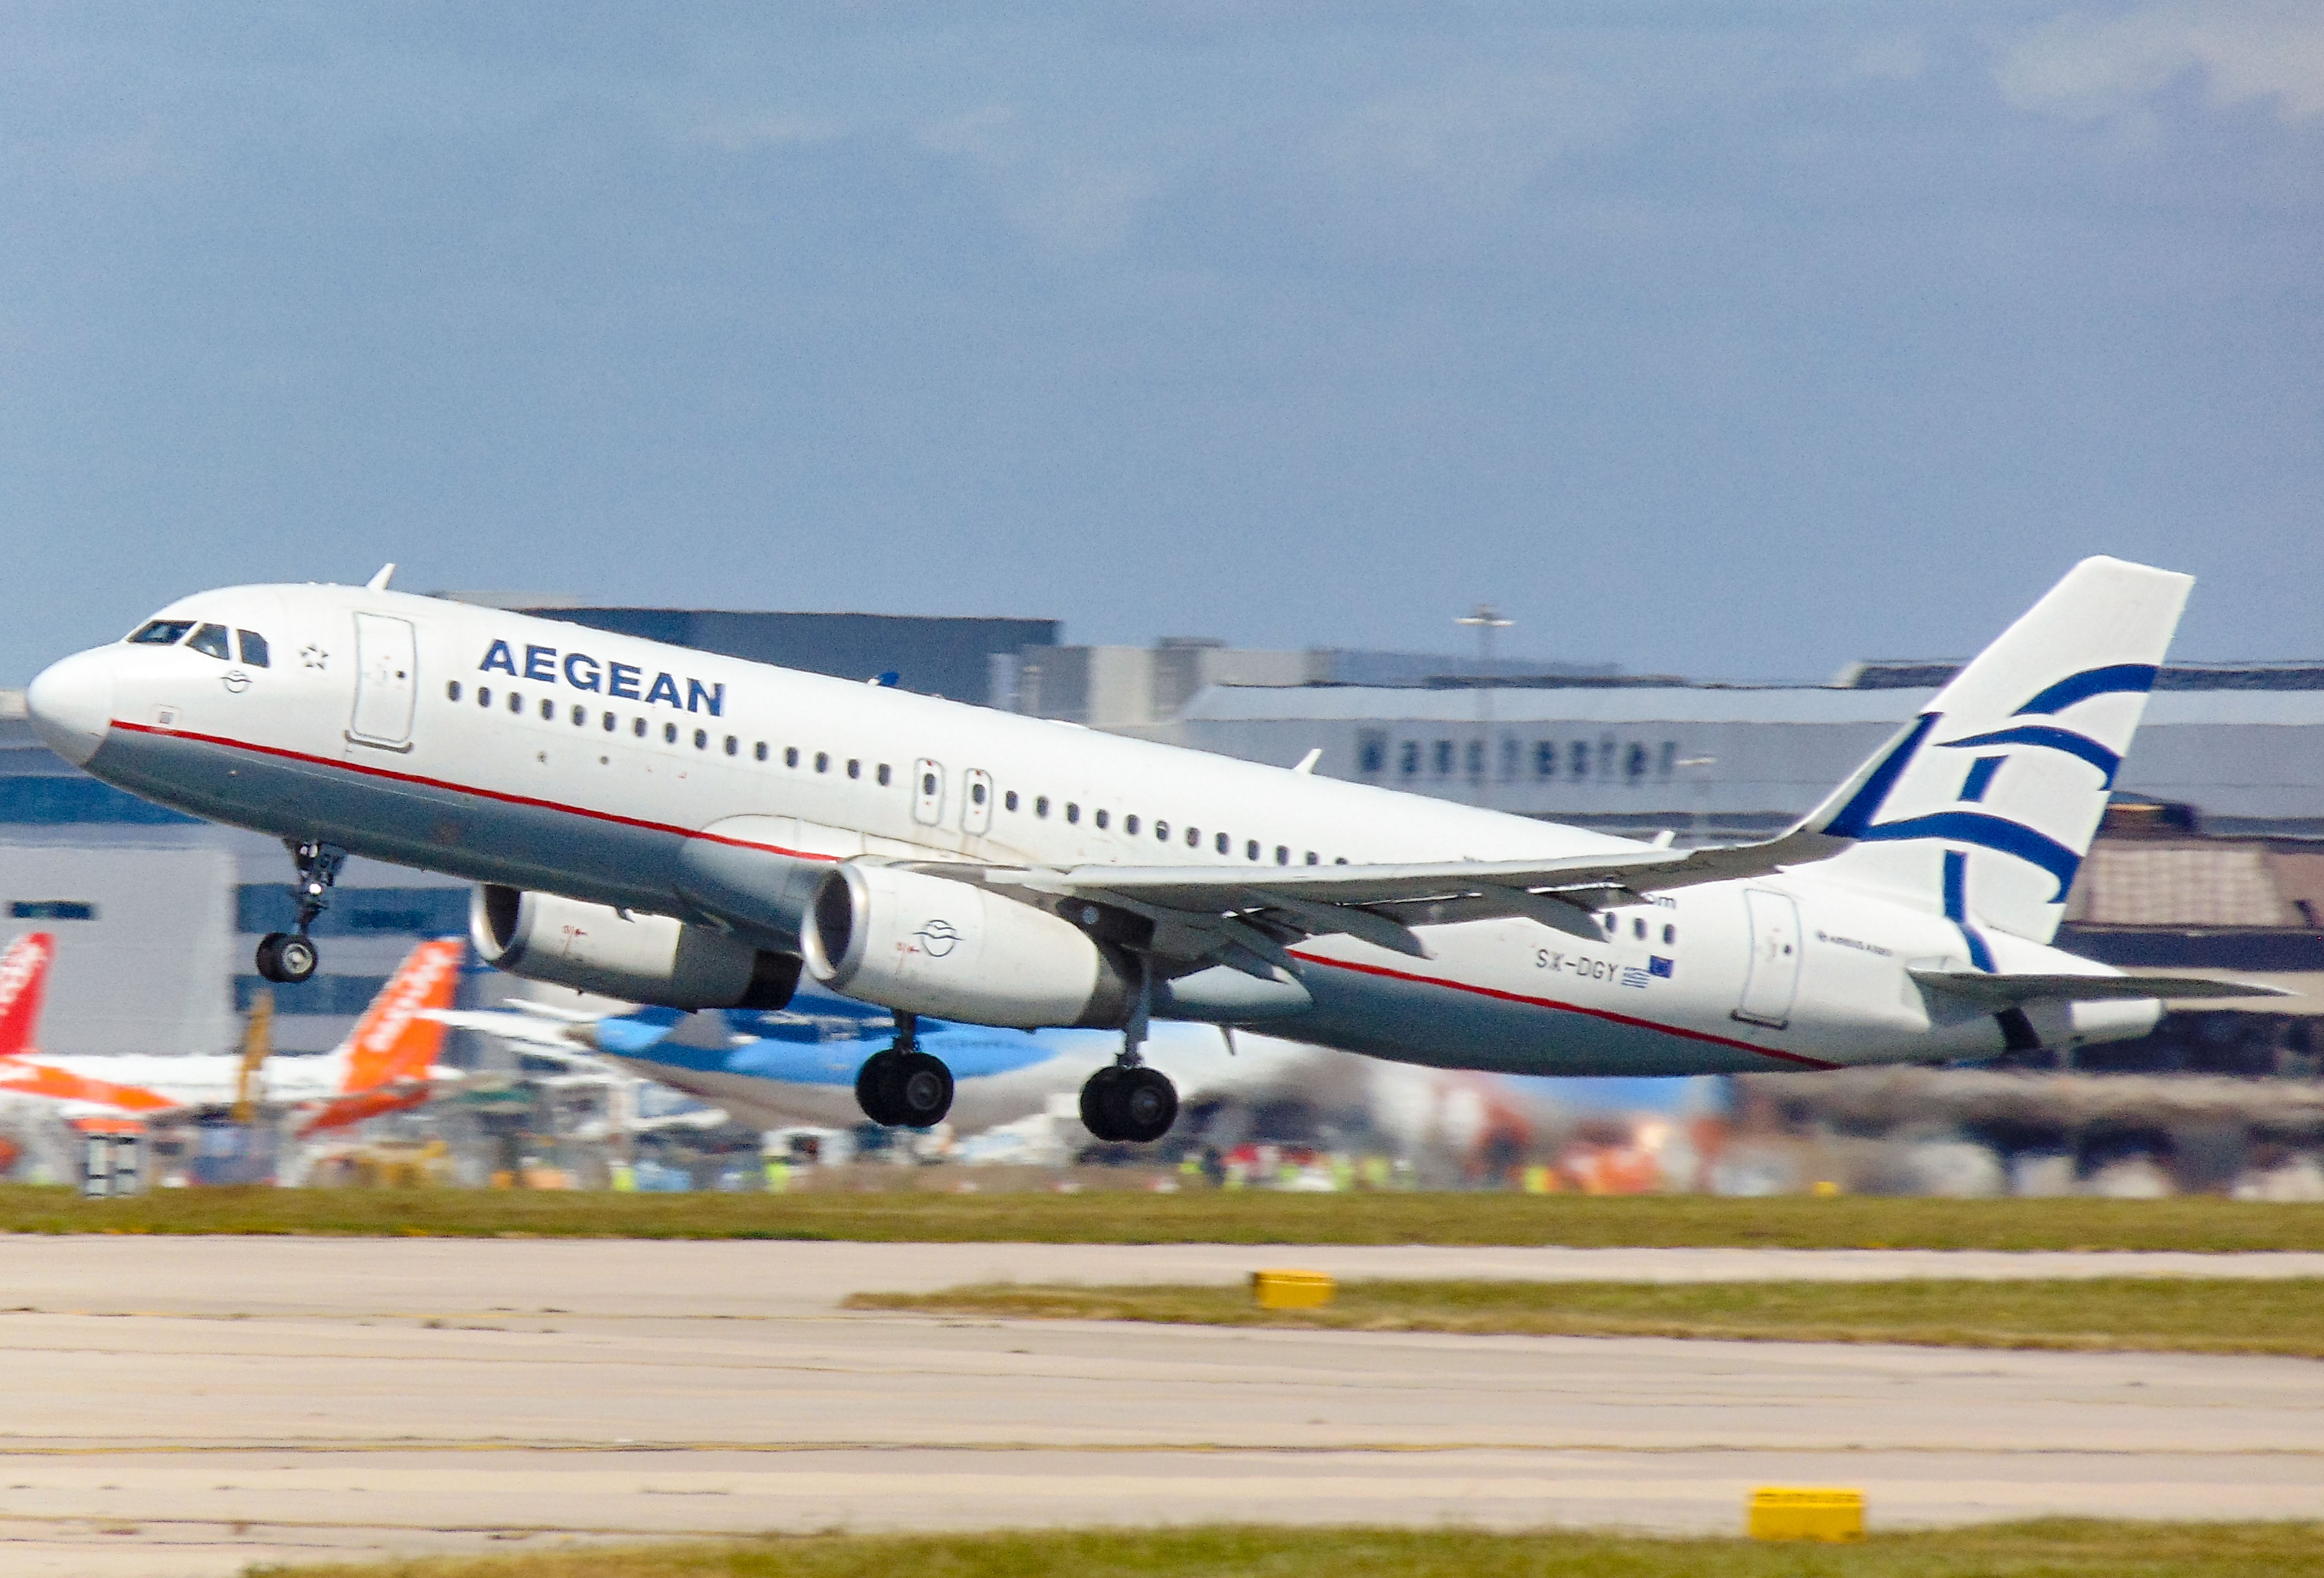 SX-DGY/SXDGY Aegean Airlines Airbus A320 Airframe Information - AVSpotters.com